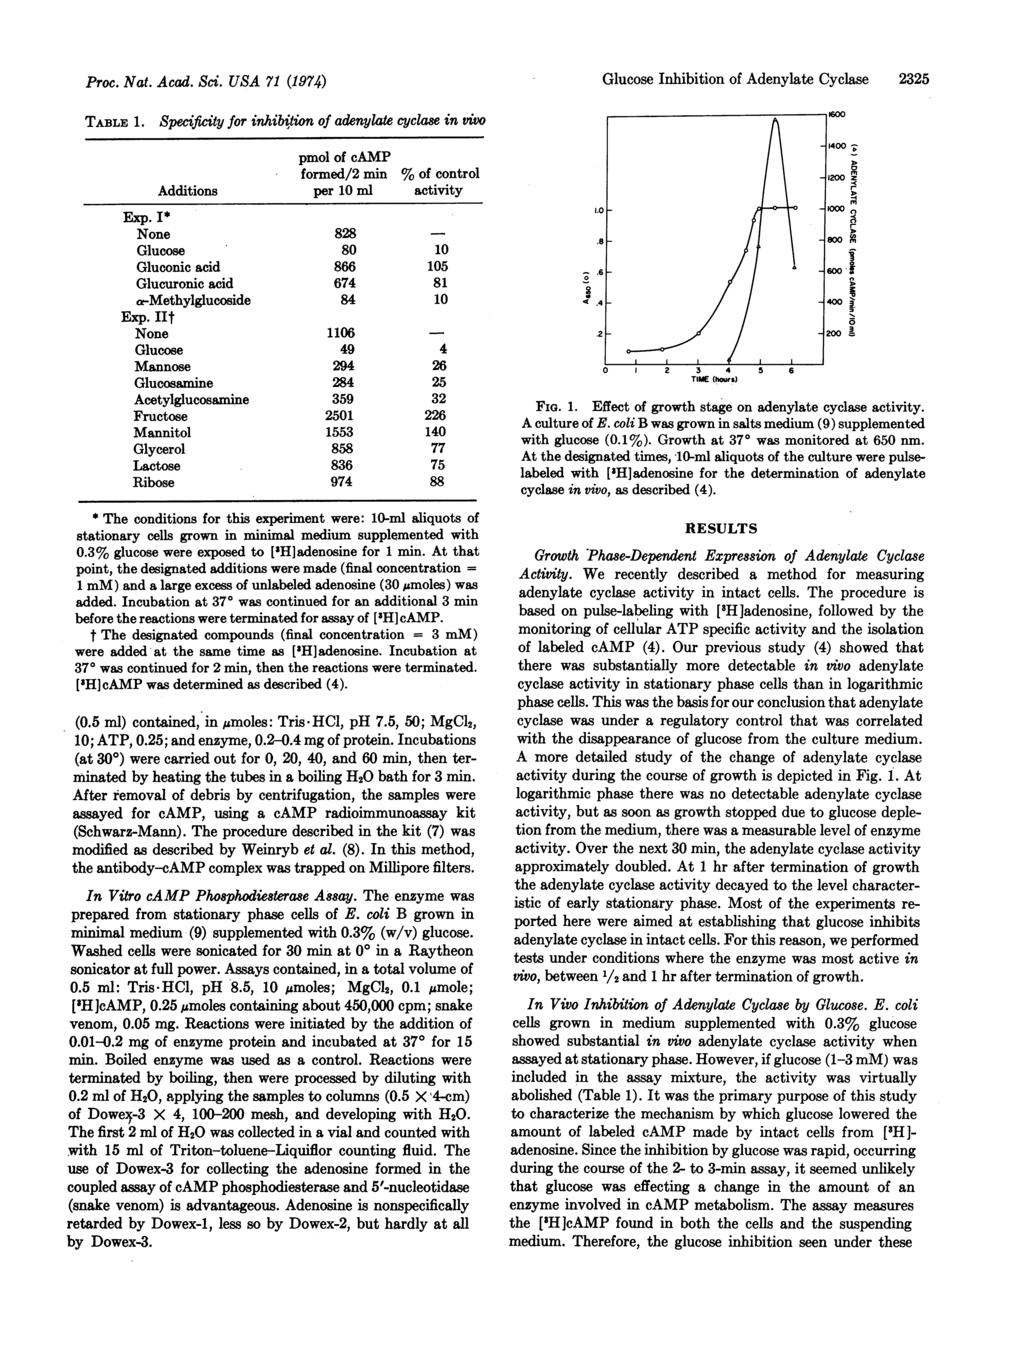 Proc. Nat. Acad. Sci. USA 71 (1974) TABLE 1. Specificity for inhibition of adenylate cyclase in viwo pmol of camp formed/2 min % of control Additions per 10 ml activity Exp.